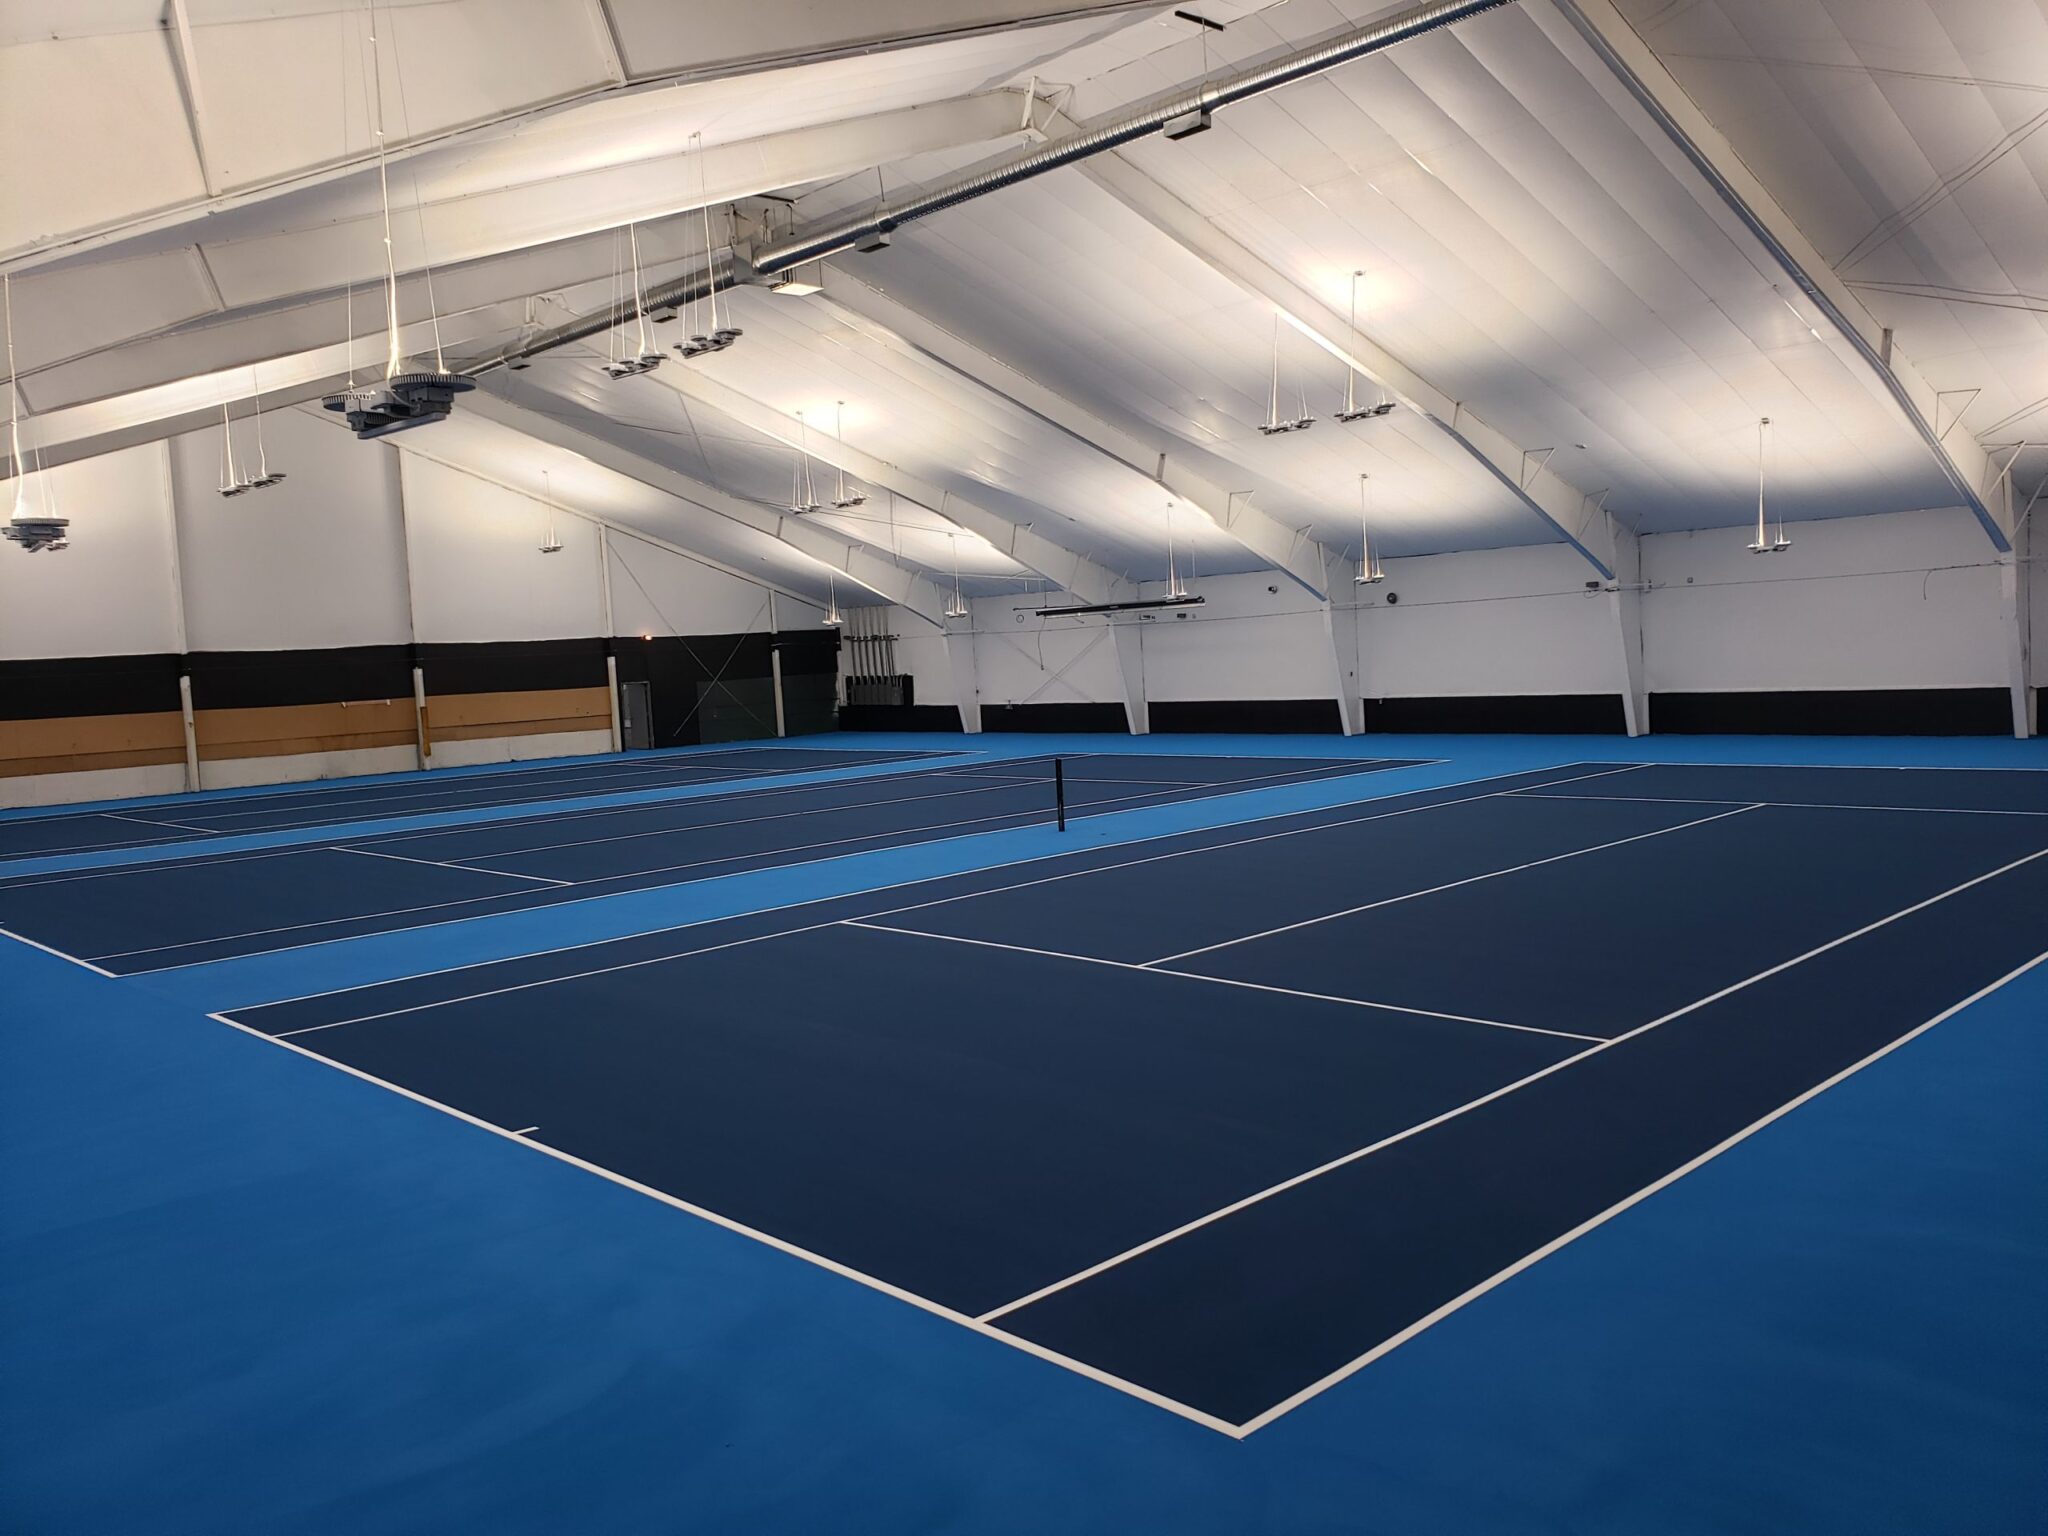 Three indoor tennis courts next to each other with blue and white colors.